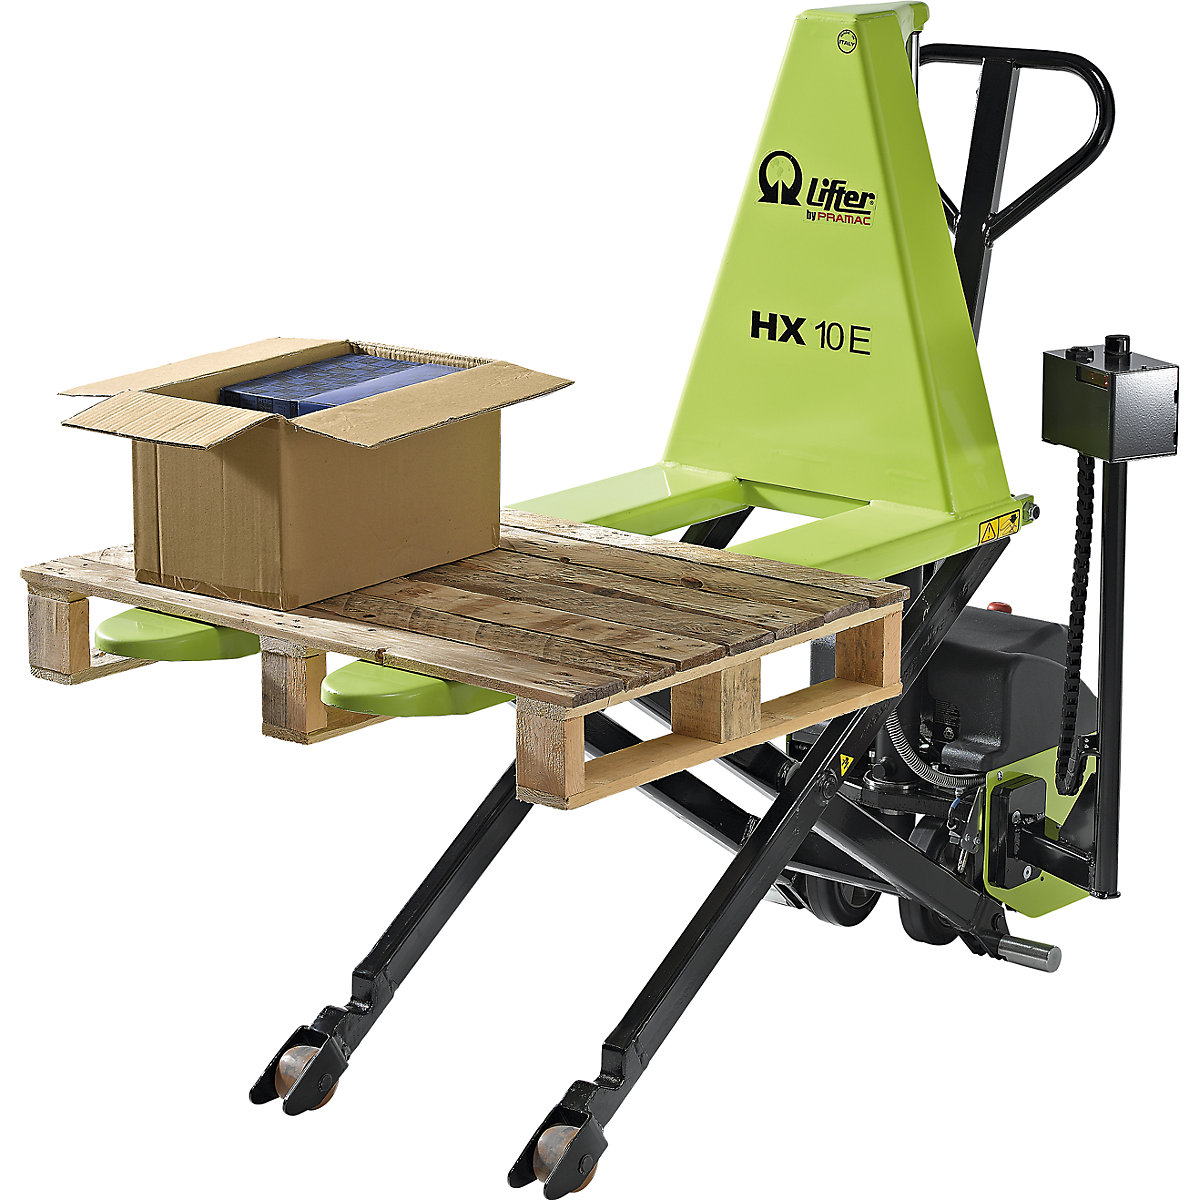 High-lift pallet truck, electro-hydraulic with level adjustment - Pramac